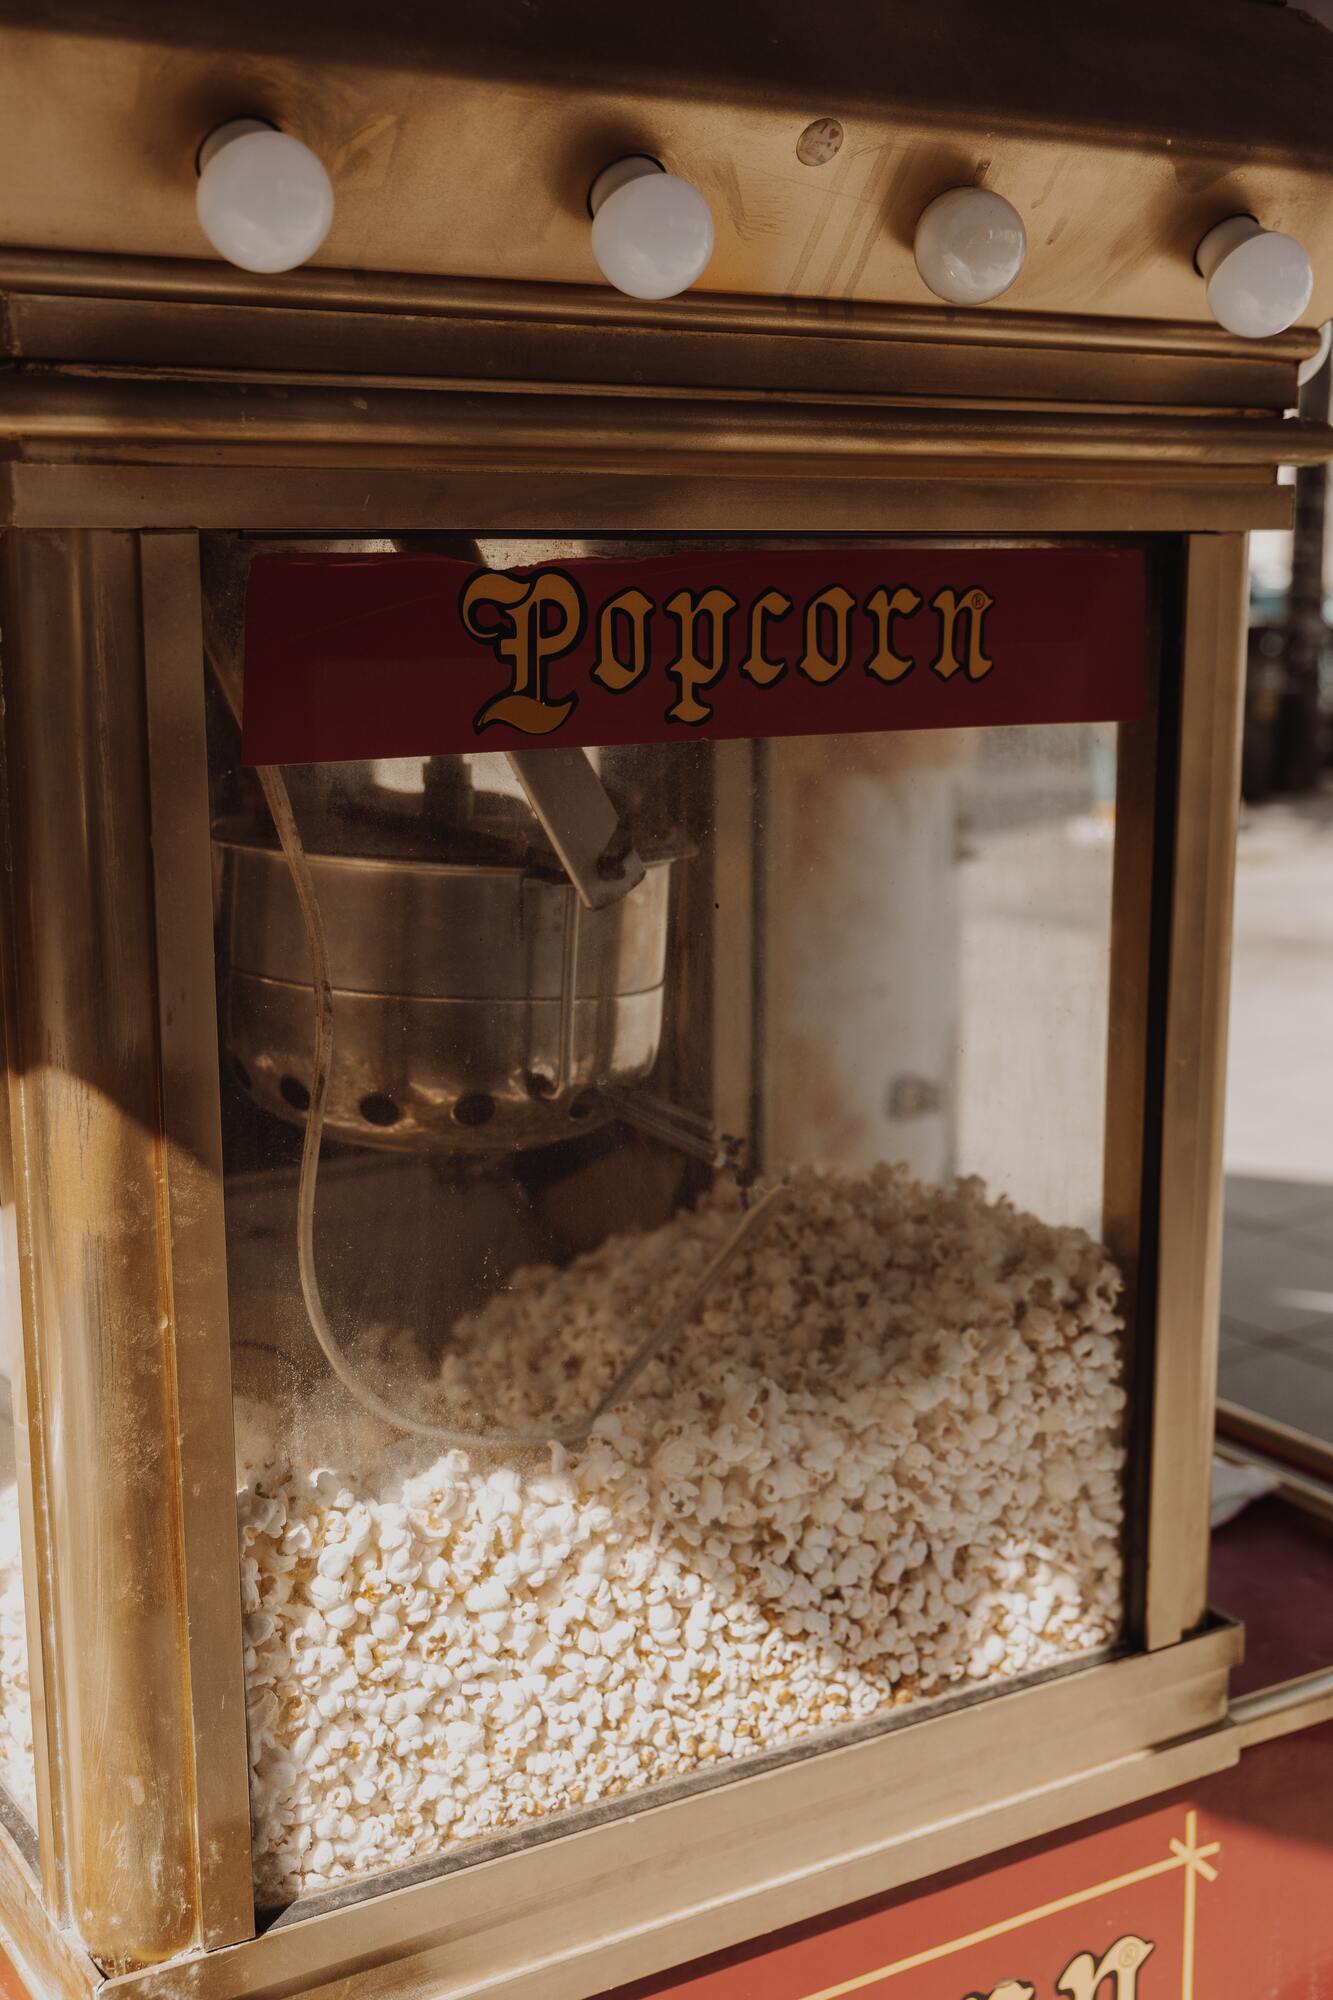 Popcorn with different flavors